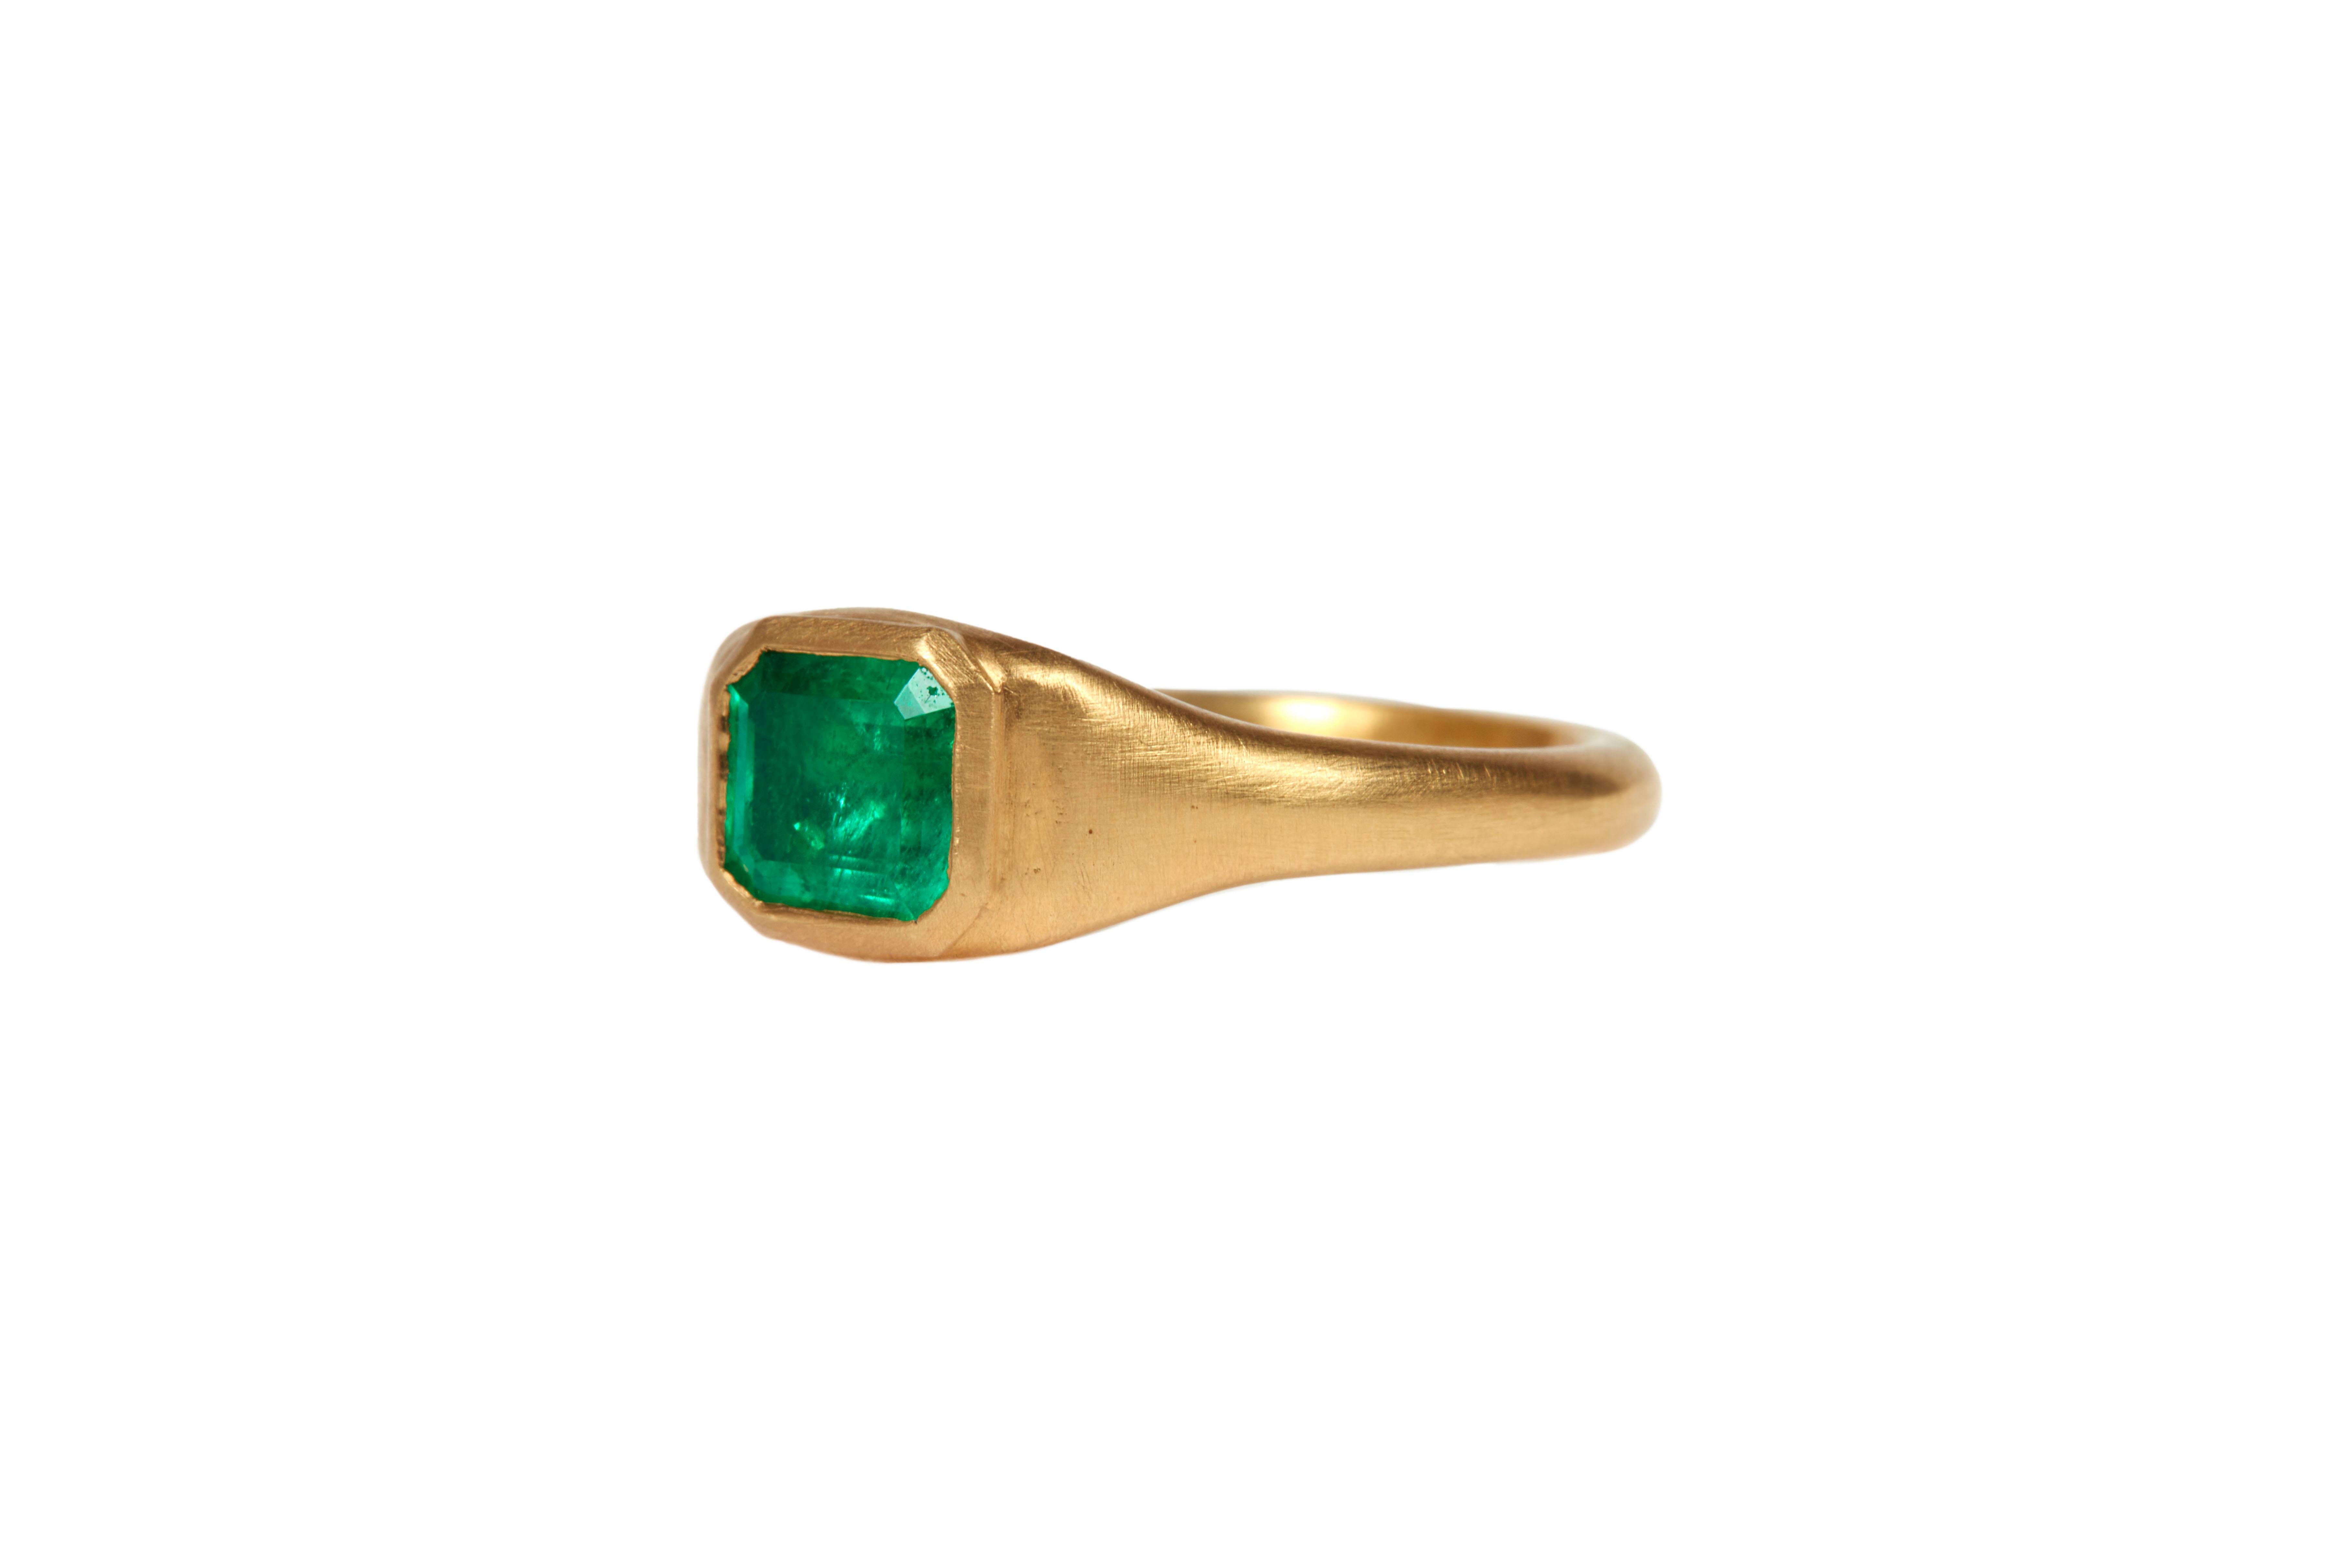 Darius Jewels Single Emerald Ring is crafted entirely by hand. This ring features a closed bezel set Colombian Emerald.

18K Yellow Gold
1.10cts Colombian Emerald